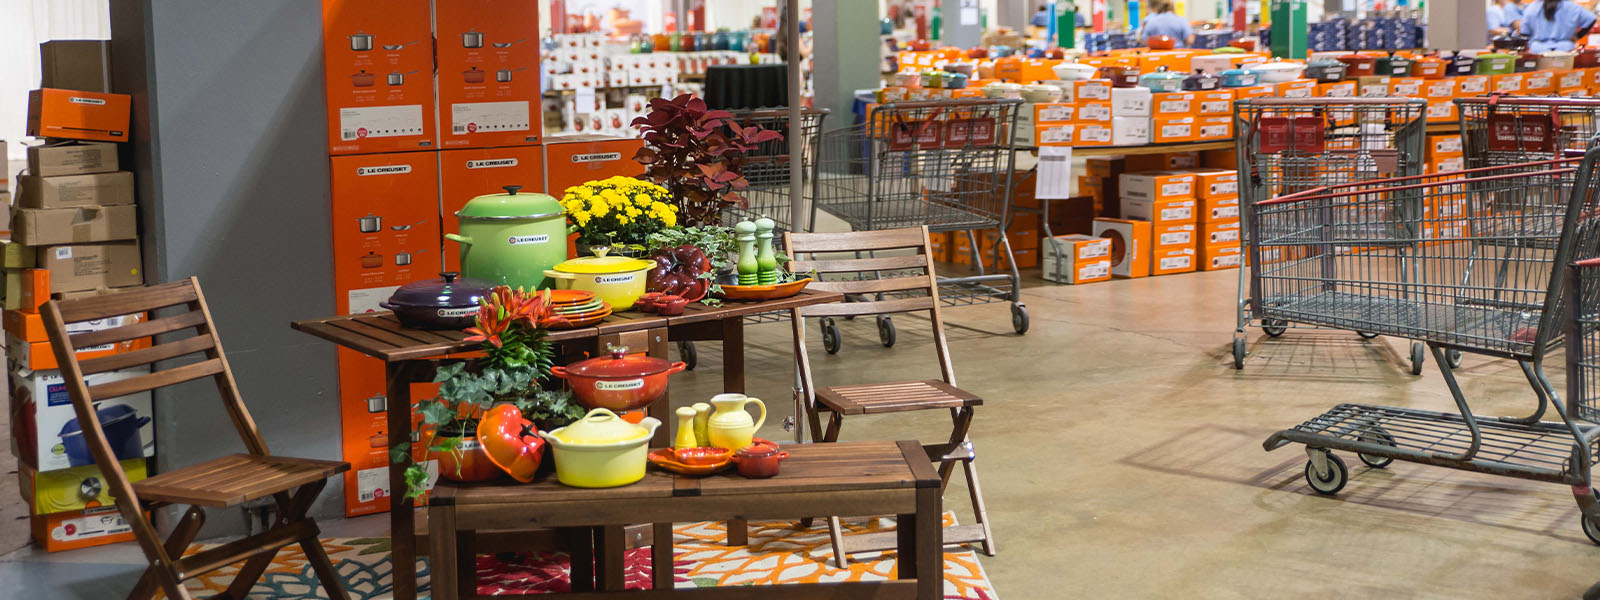 Le Creuset sale returns to Charlotte's The Park Expo and Conference Center